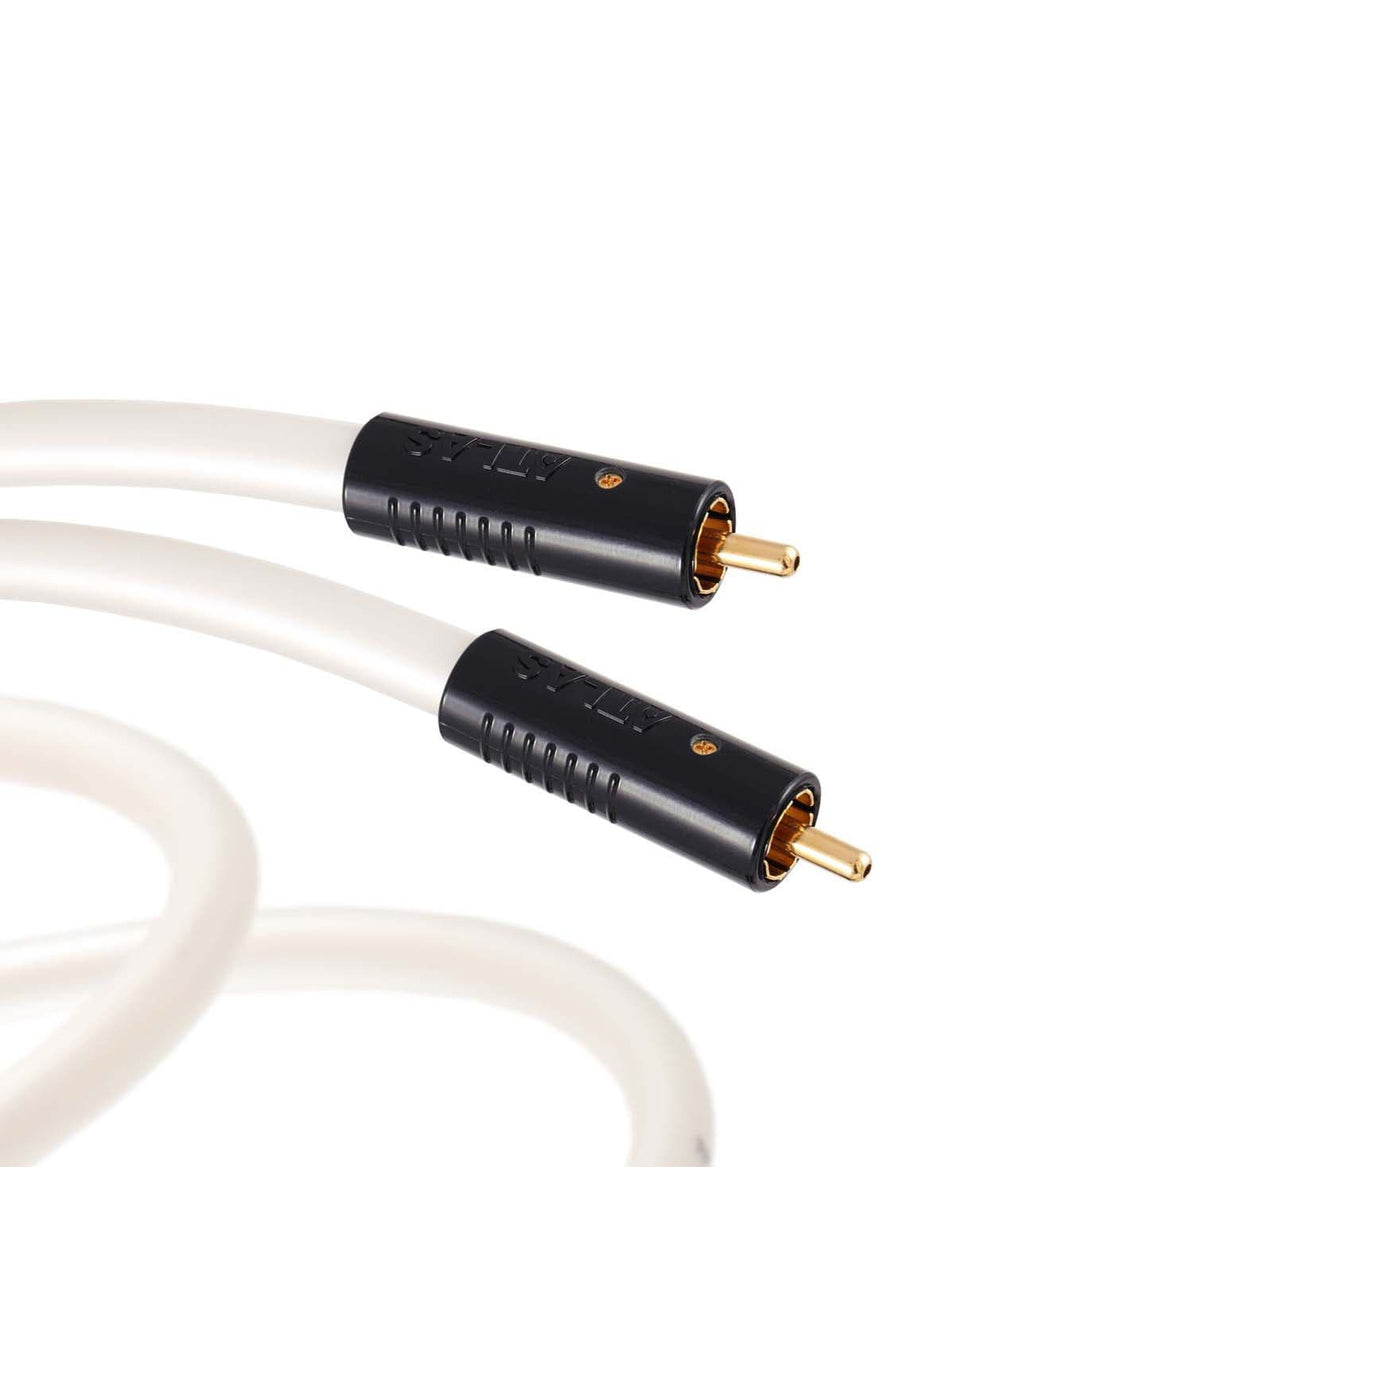 Atlas Equator Achromatic Subwoofer RCA Subwoofer Cable at Audio Influence